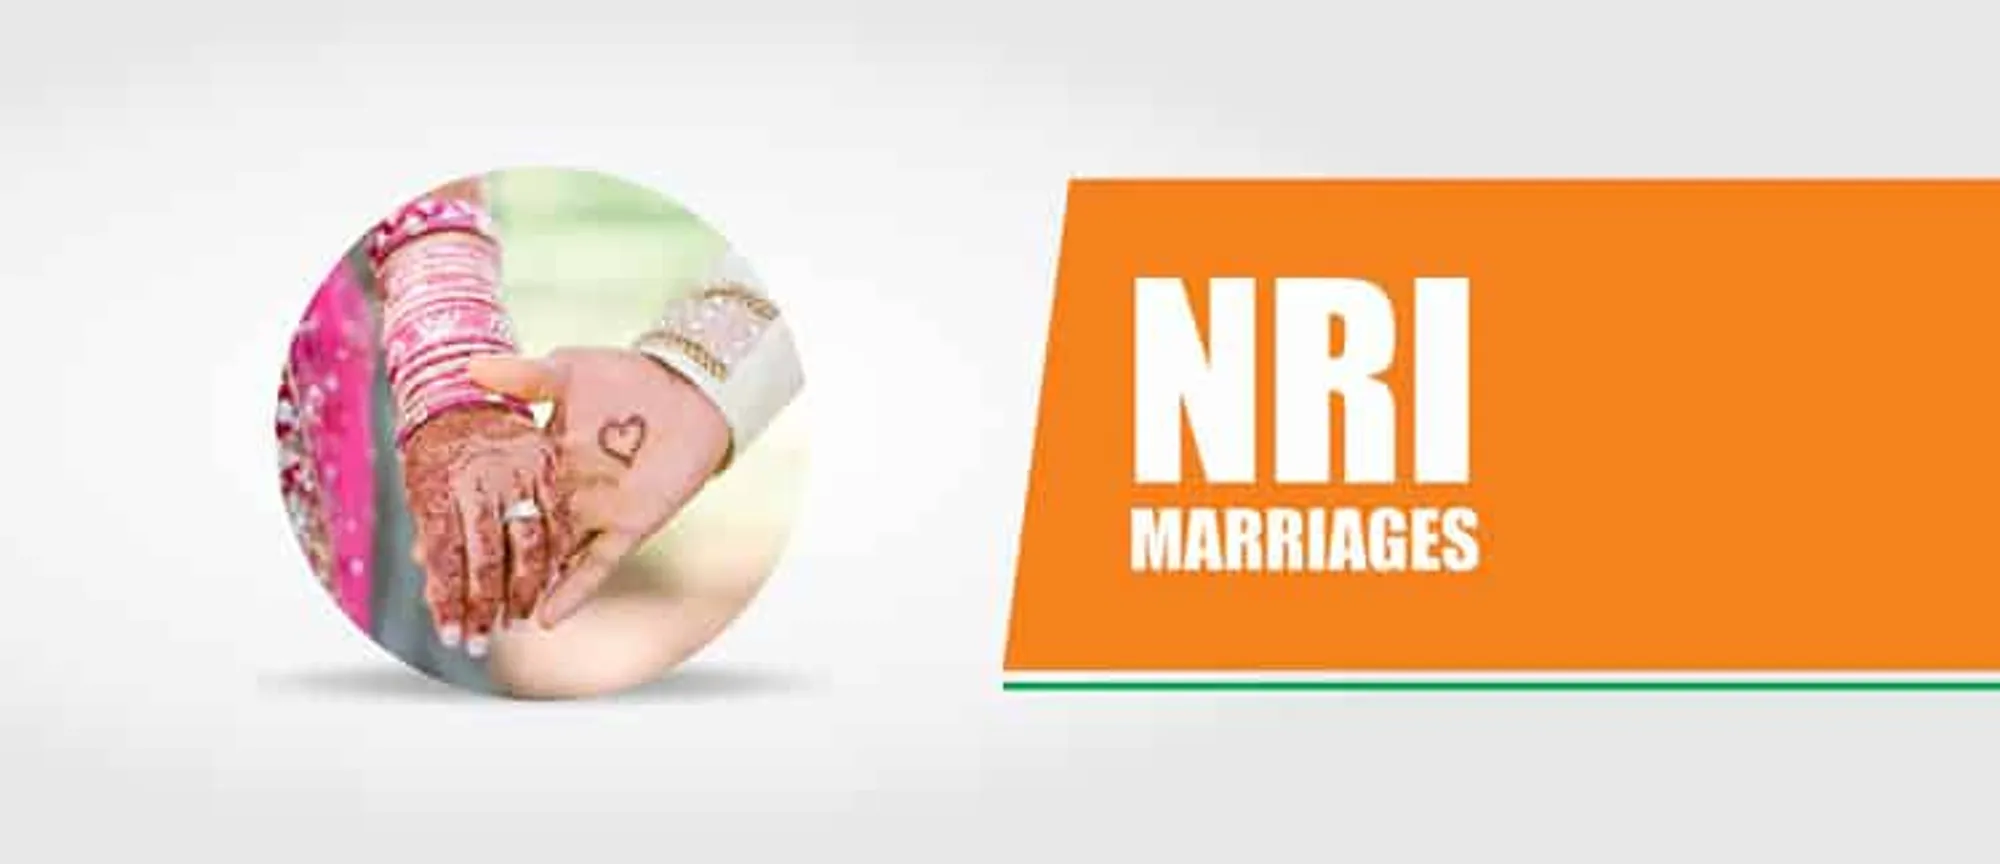 The not-so-sweet face of NRI marriages – and how to prevent it